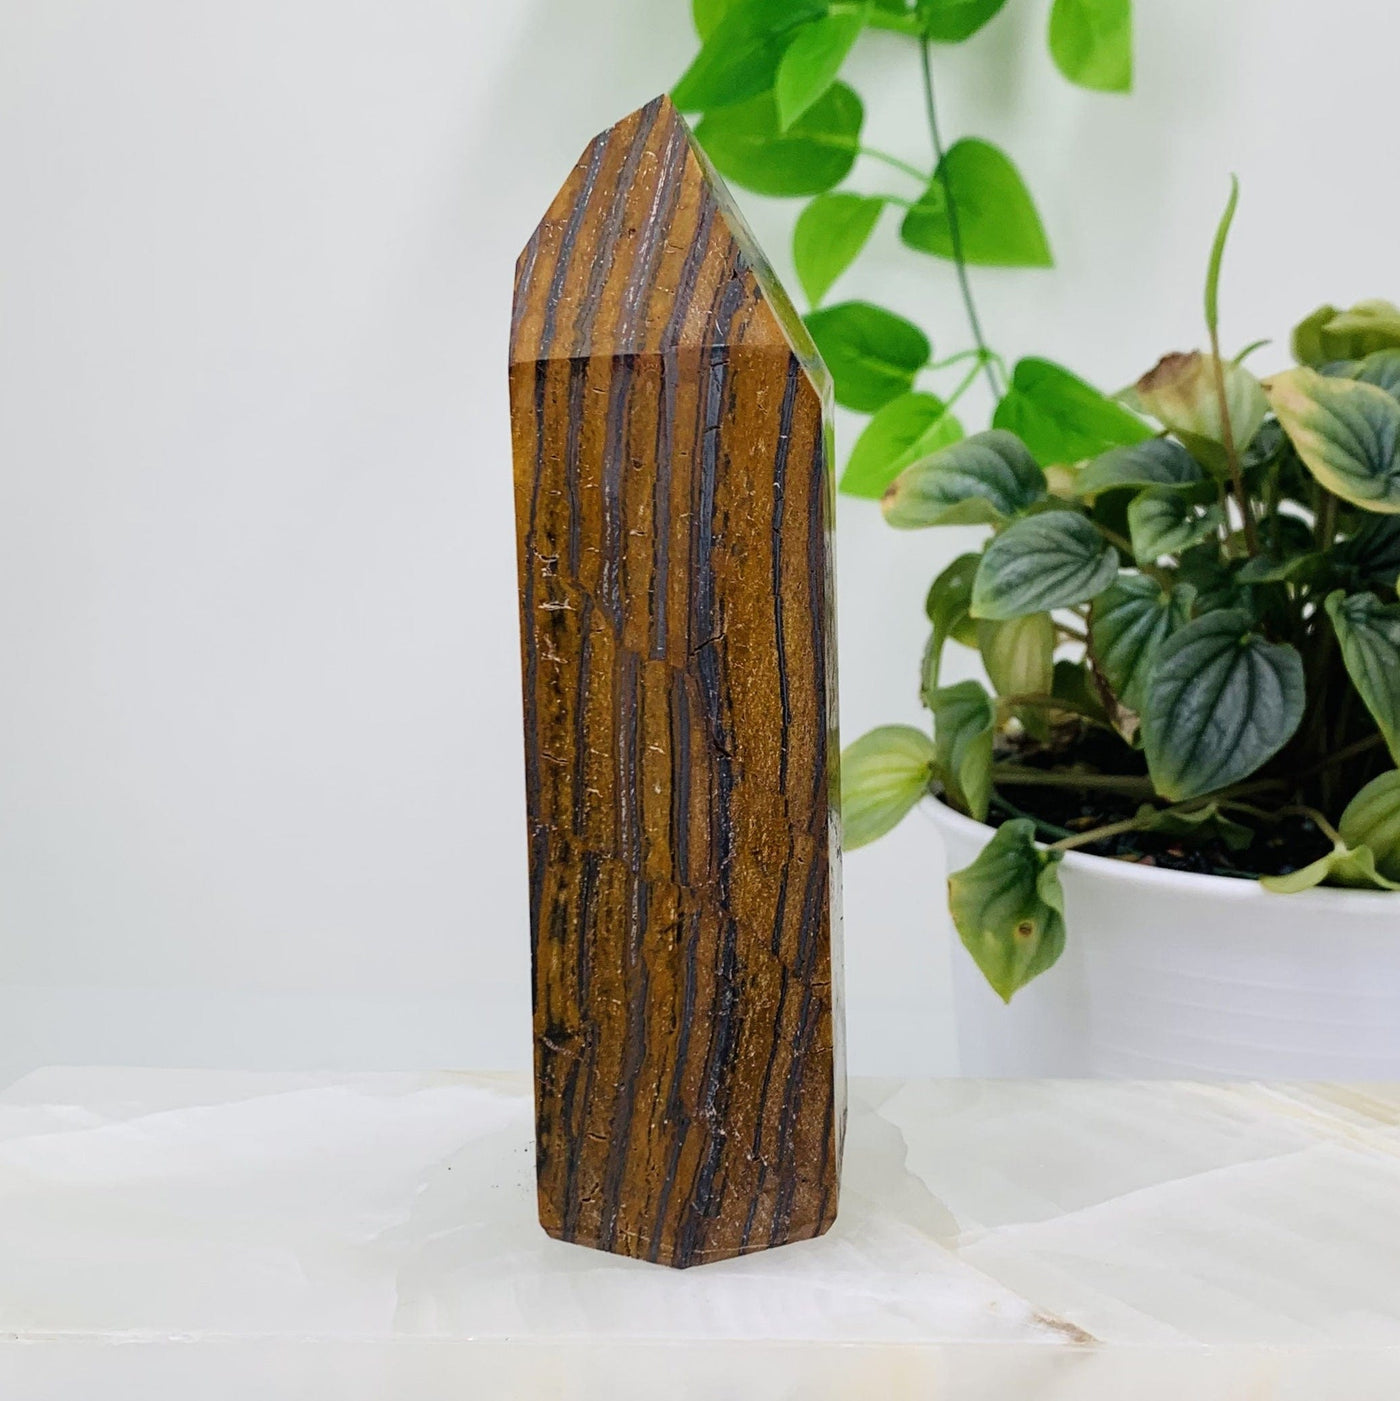  Side Shot of Tigers eye Polished Tower for this listing, The tigers eye polished tower is being displayed on a white marbled surface and white back ground next to a green natural plant.